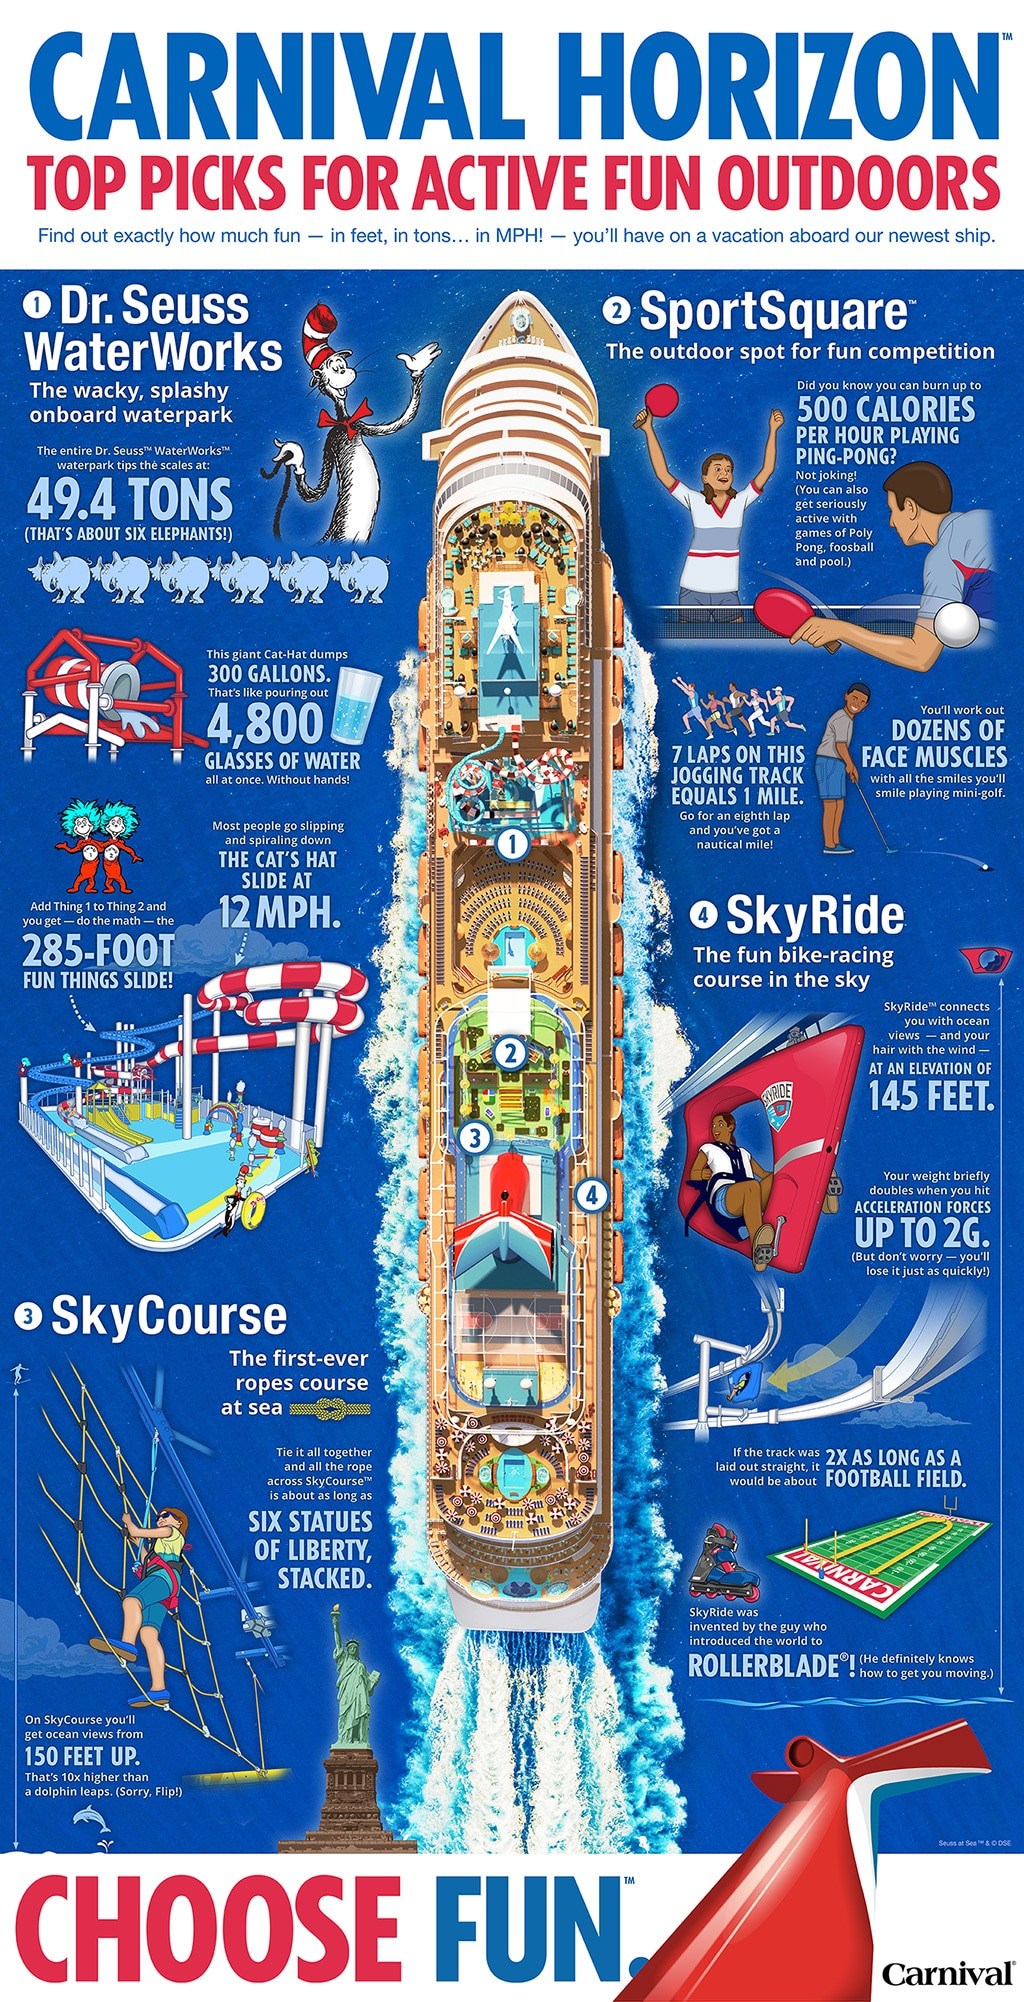 Picture of: Carnival Horizon: Top Picks for Active Fun Outdoors [Infographic